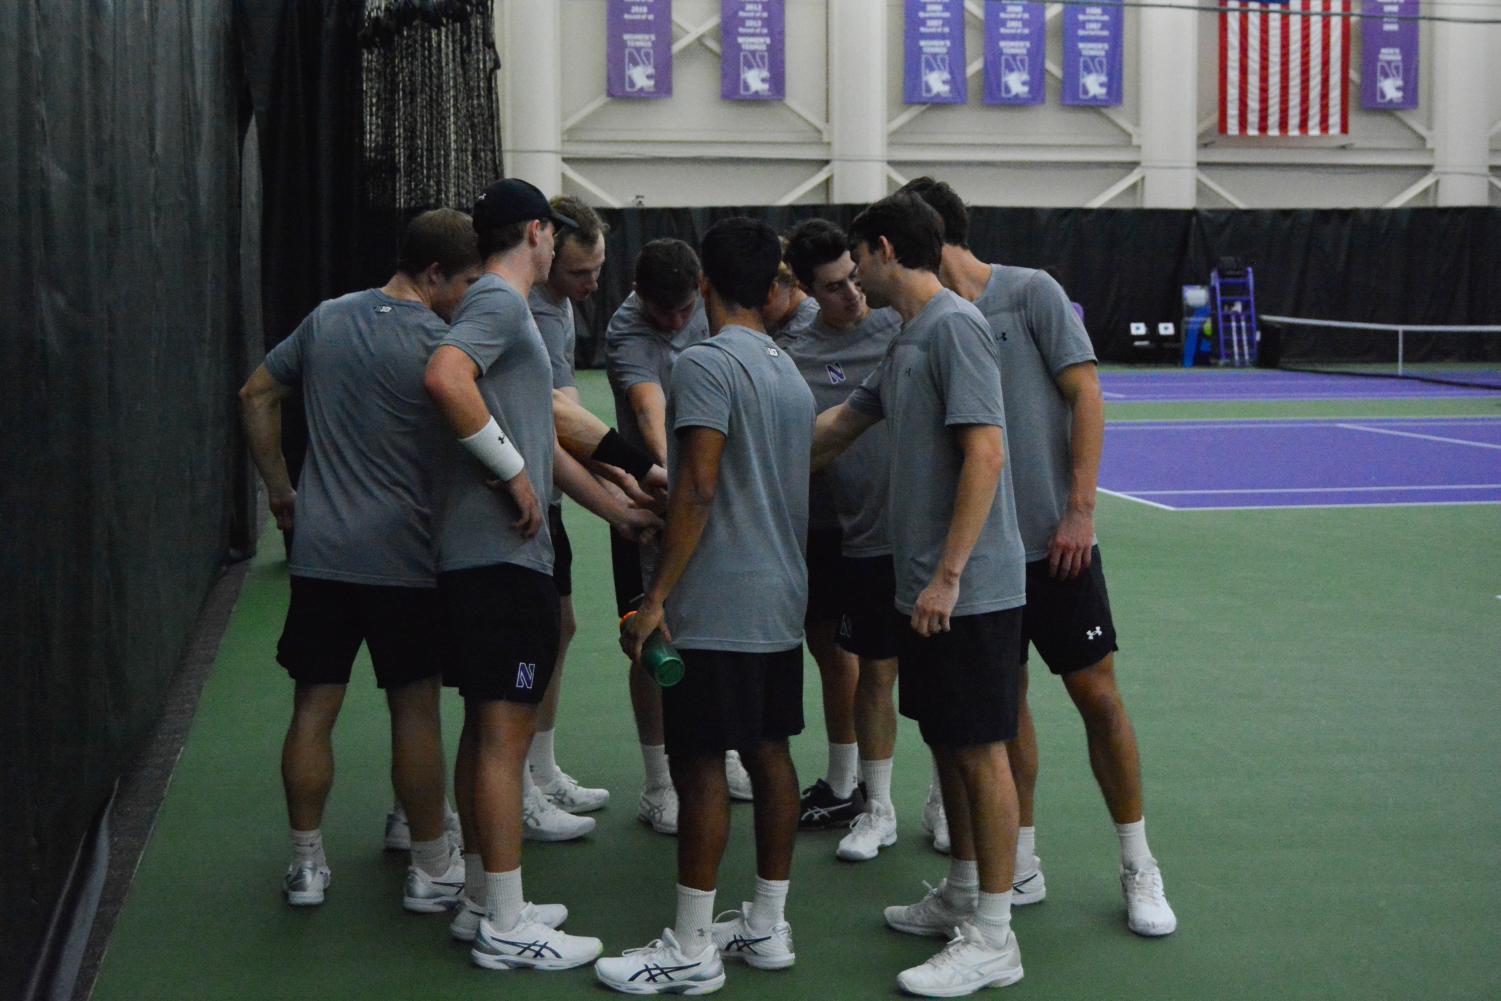 Tennis+players+in+gray+shirts+and+black+shorts+huddle+on+green+and+purple+court.